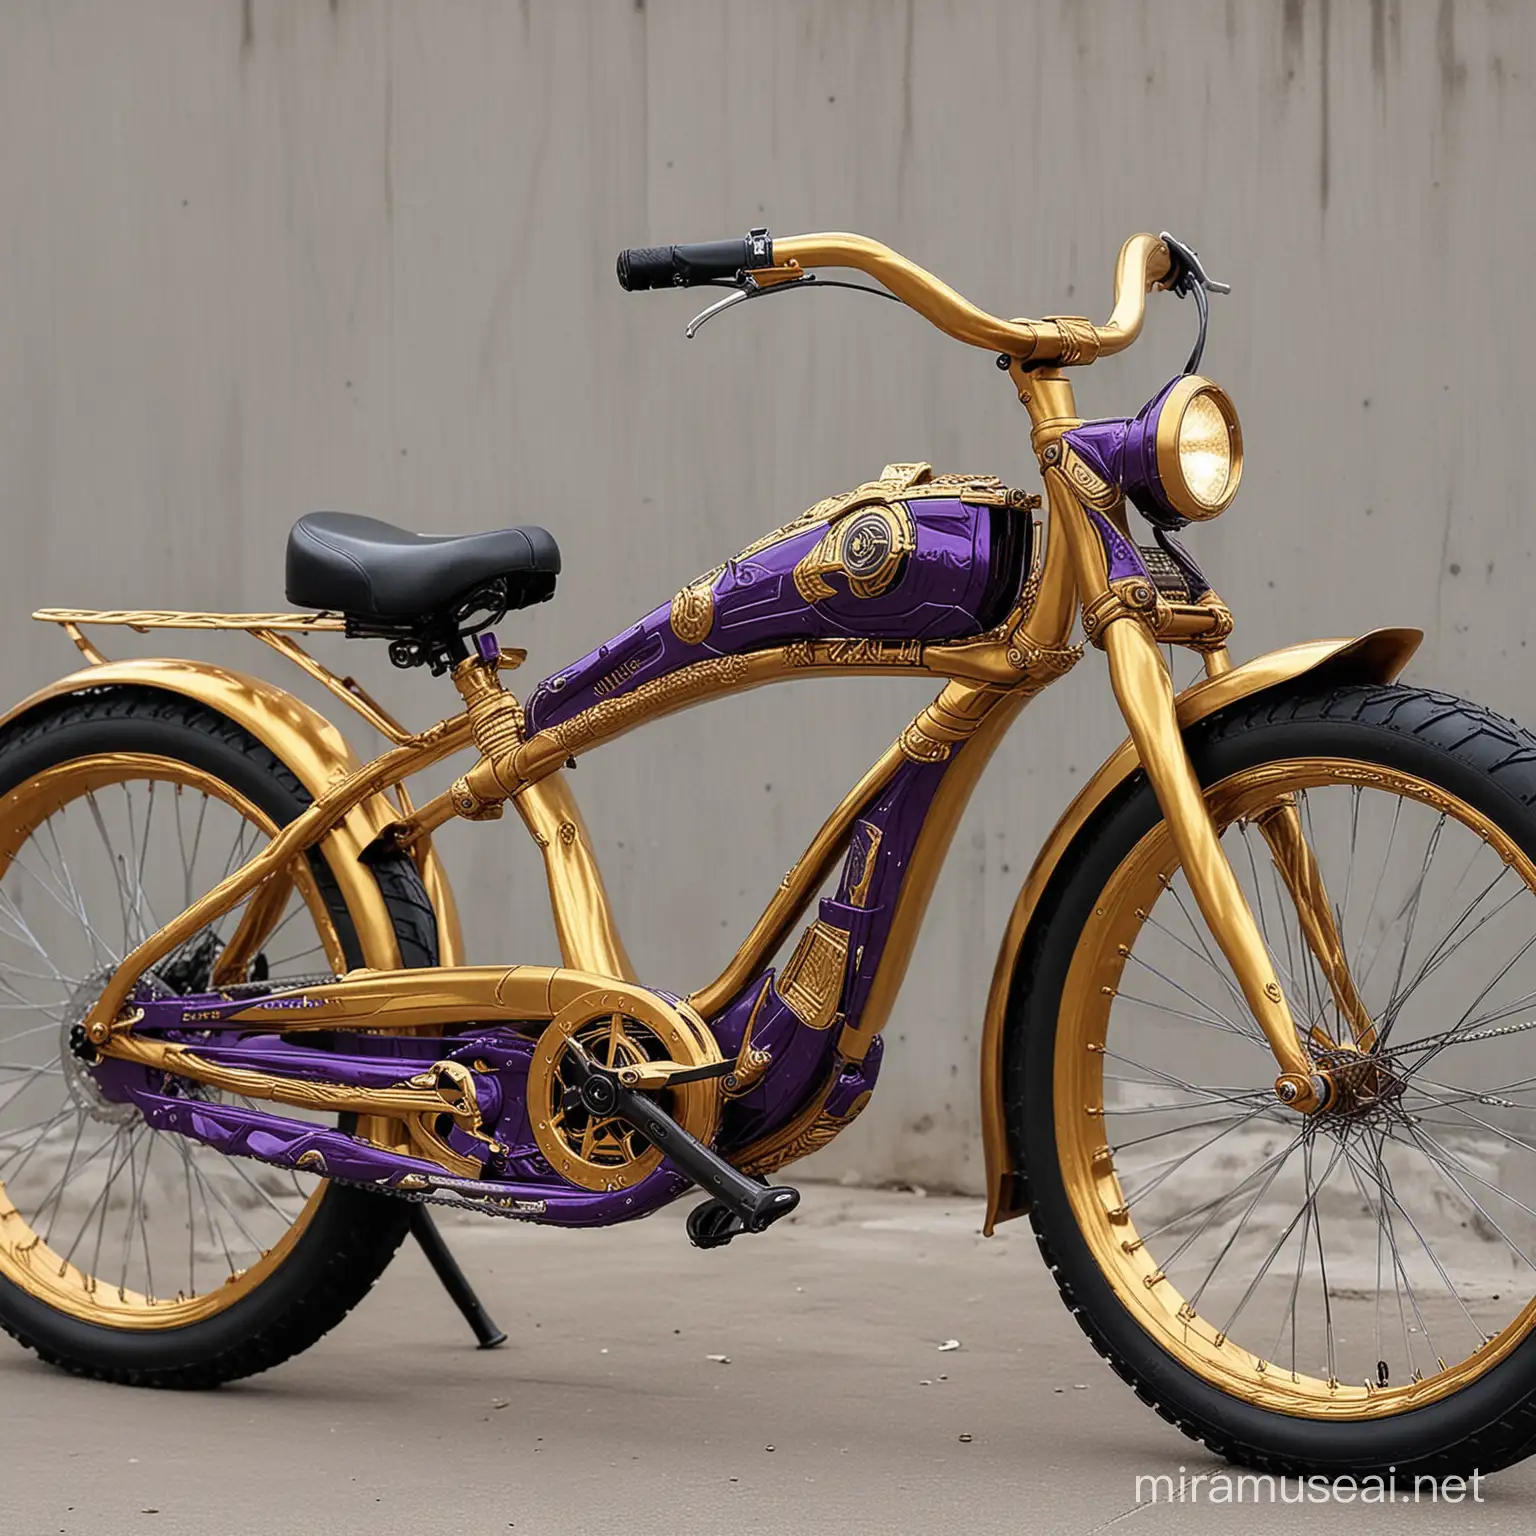 Thanos Style bicycle